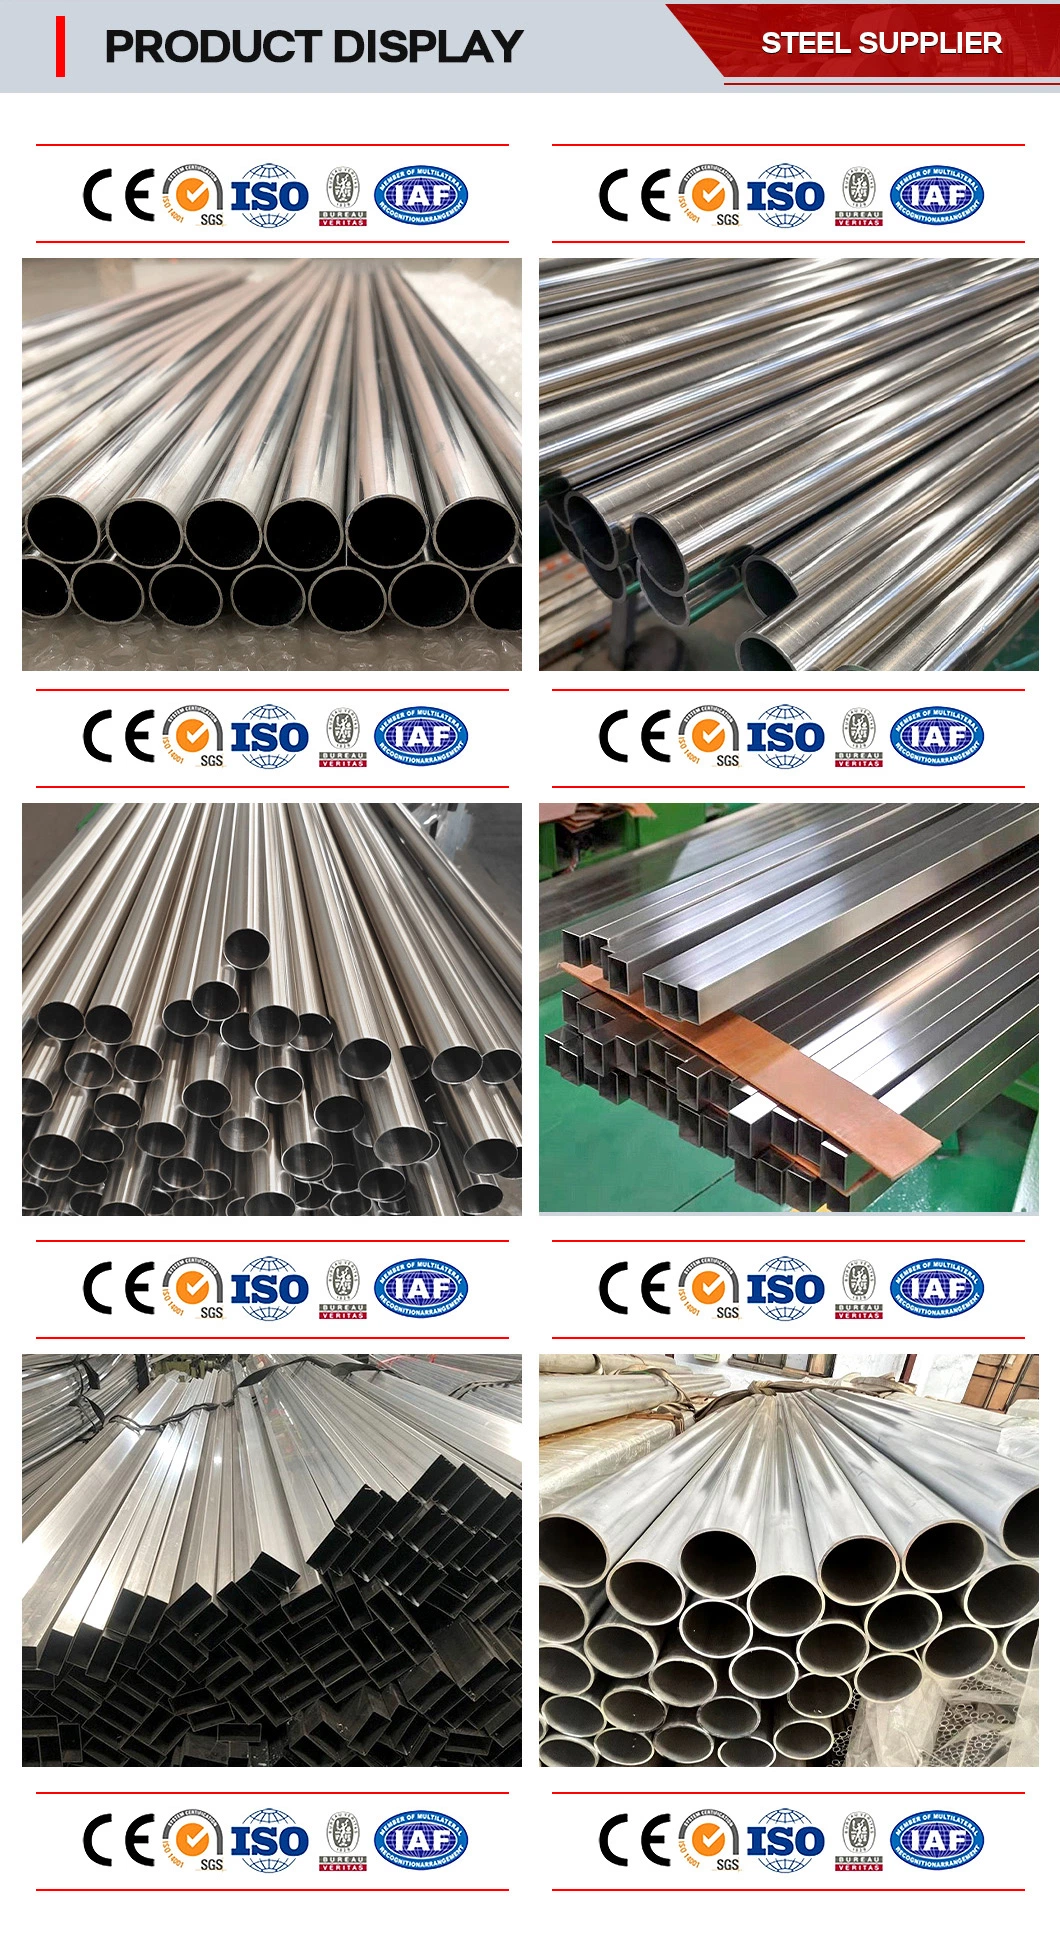 AISI Atsm 304 Round Stainless Steel Pipe Seamless Stainless Steel Pipe/Tube